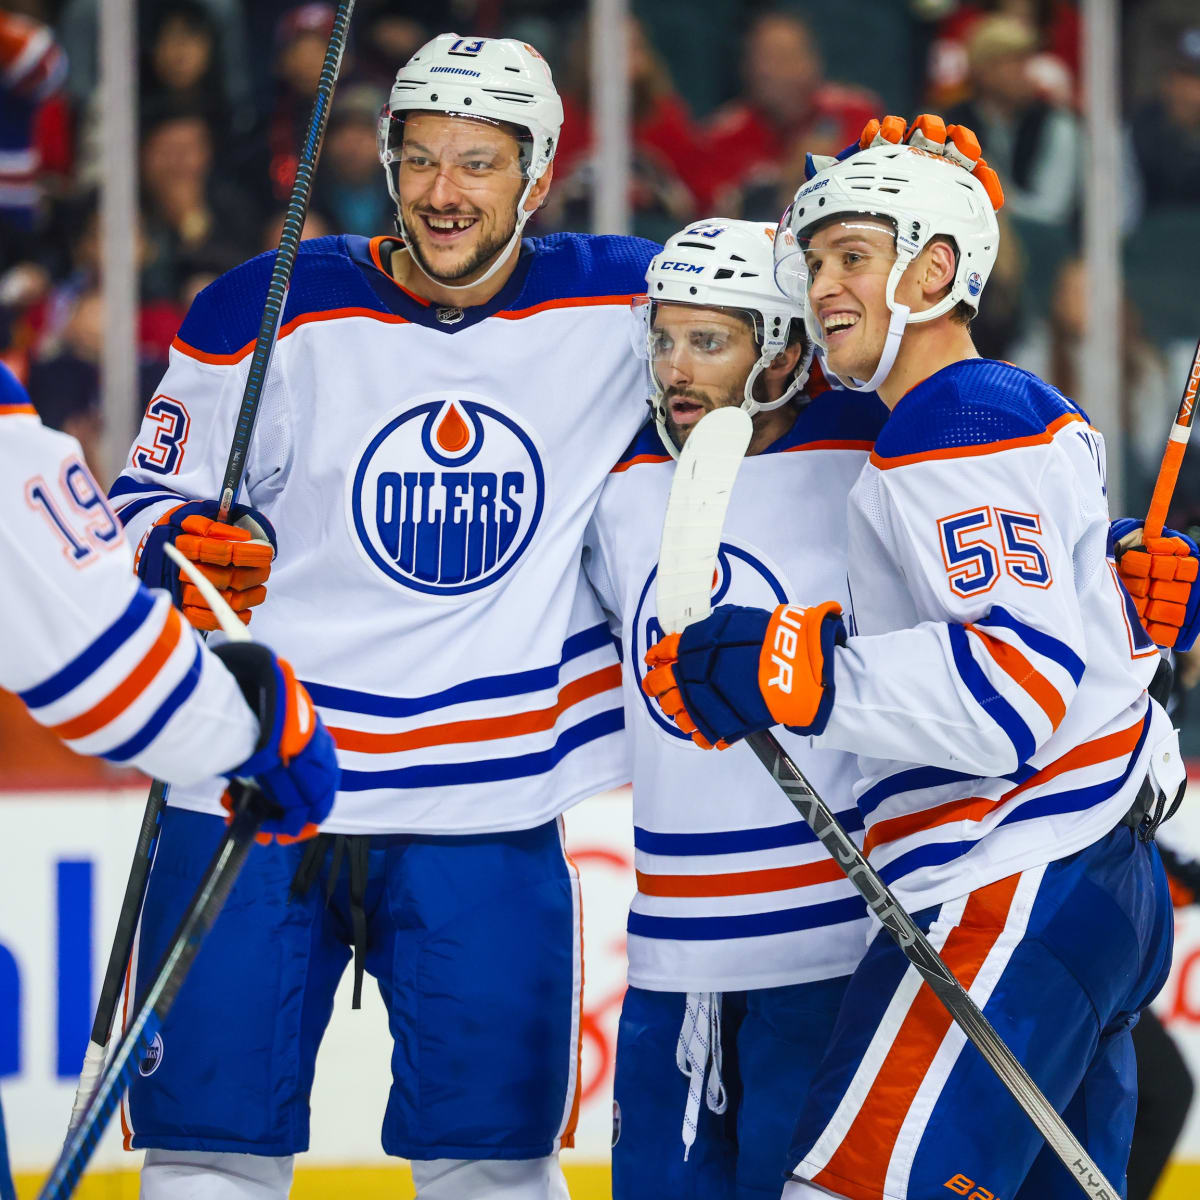 Dylan Holloway trying to make the most of his limited minutes with Oilers